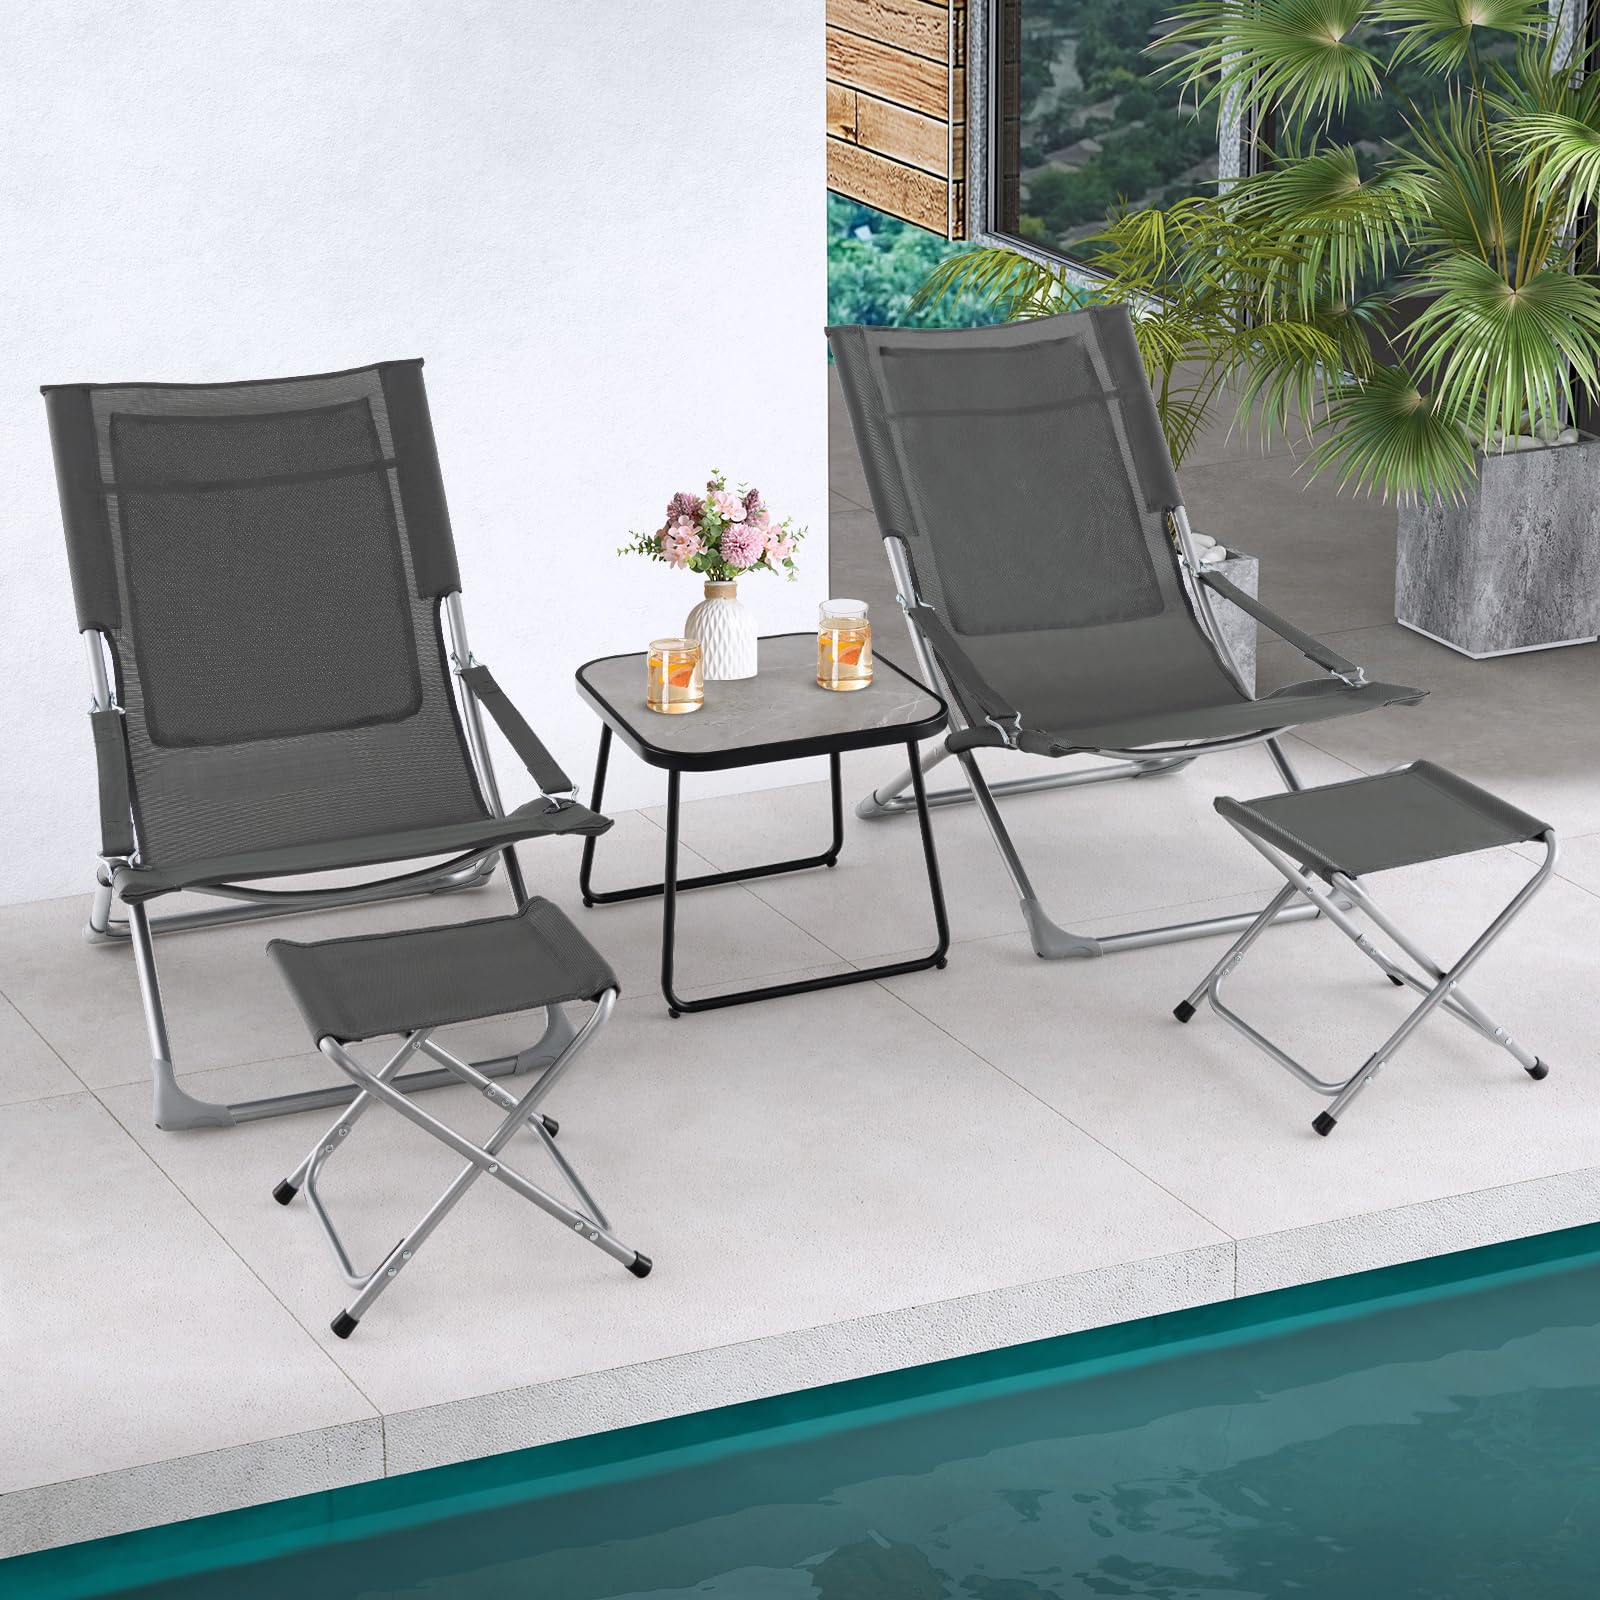 Giantex 5-Piece Patio Bistro Set, Folding Lounge Chairs with Footrest Stool & Side Table, Removable Cushion